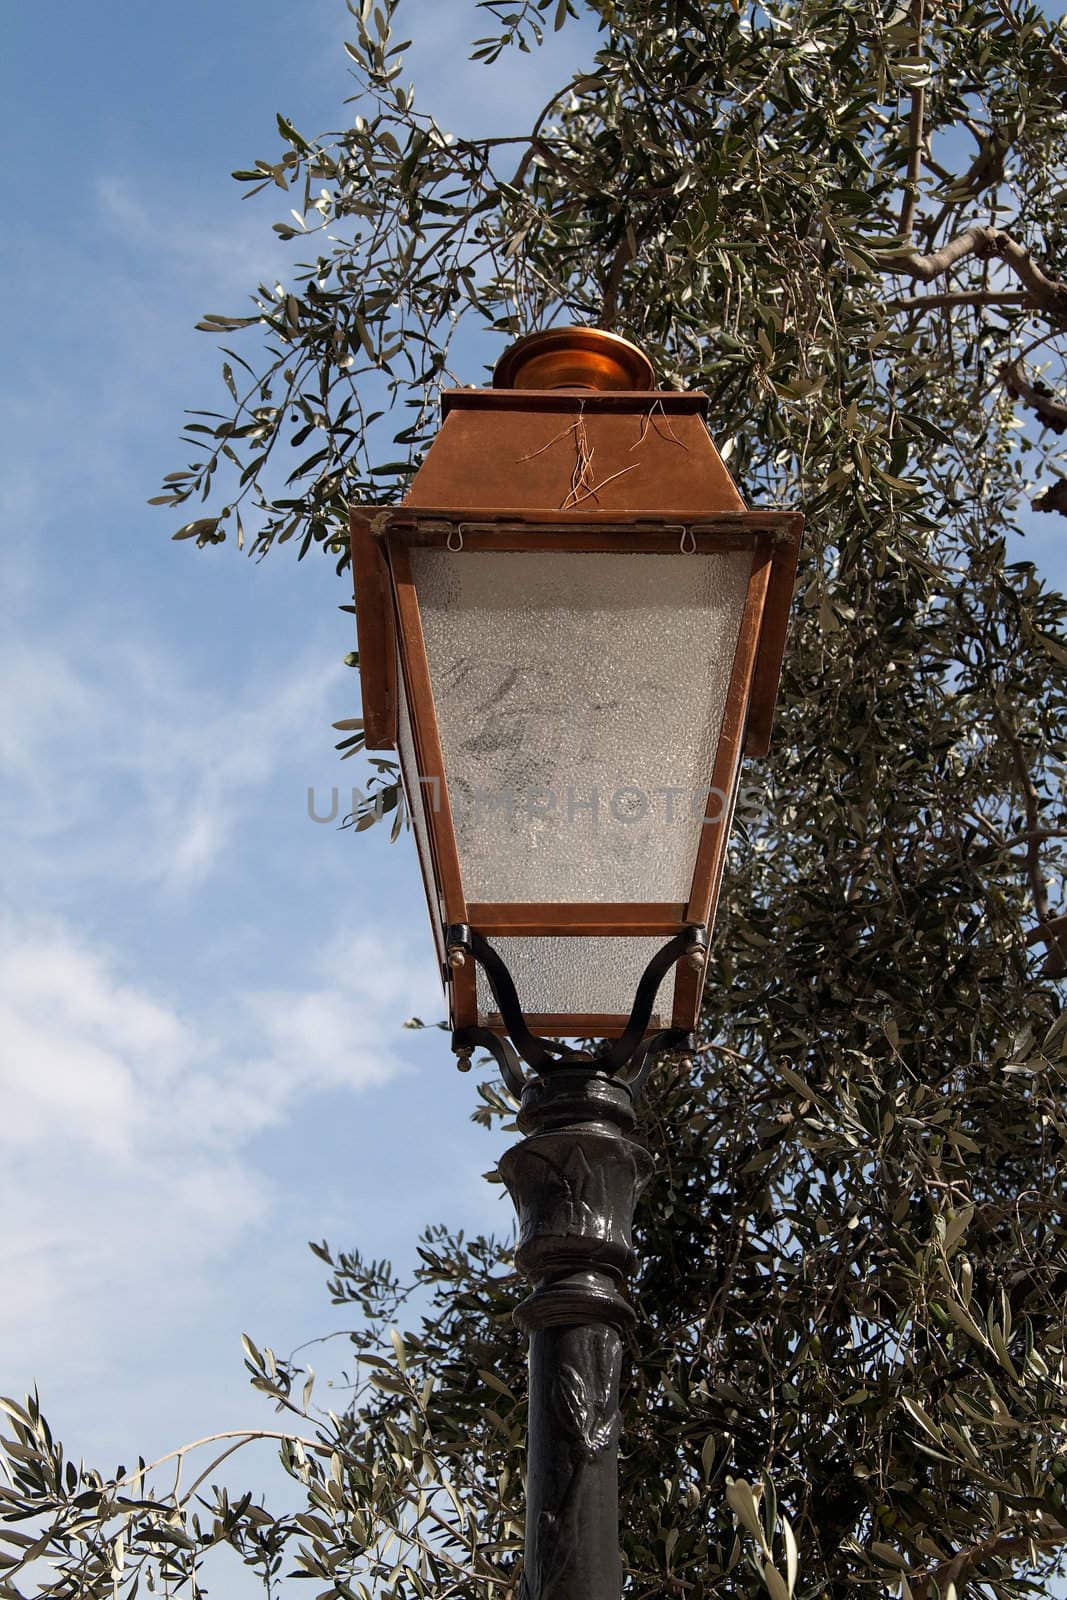 A old looking street light with a bronze top